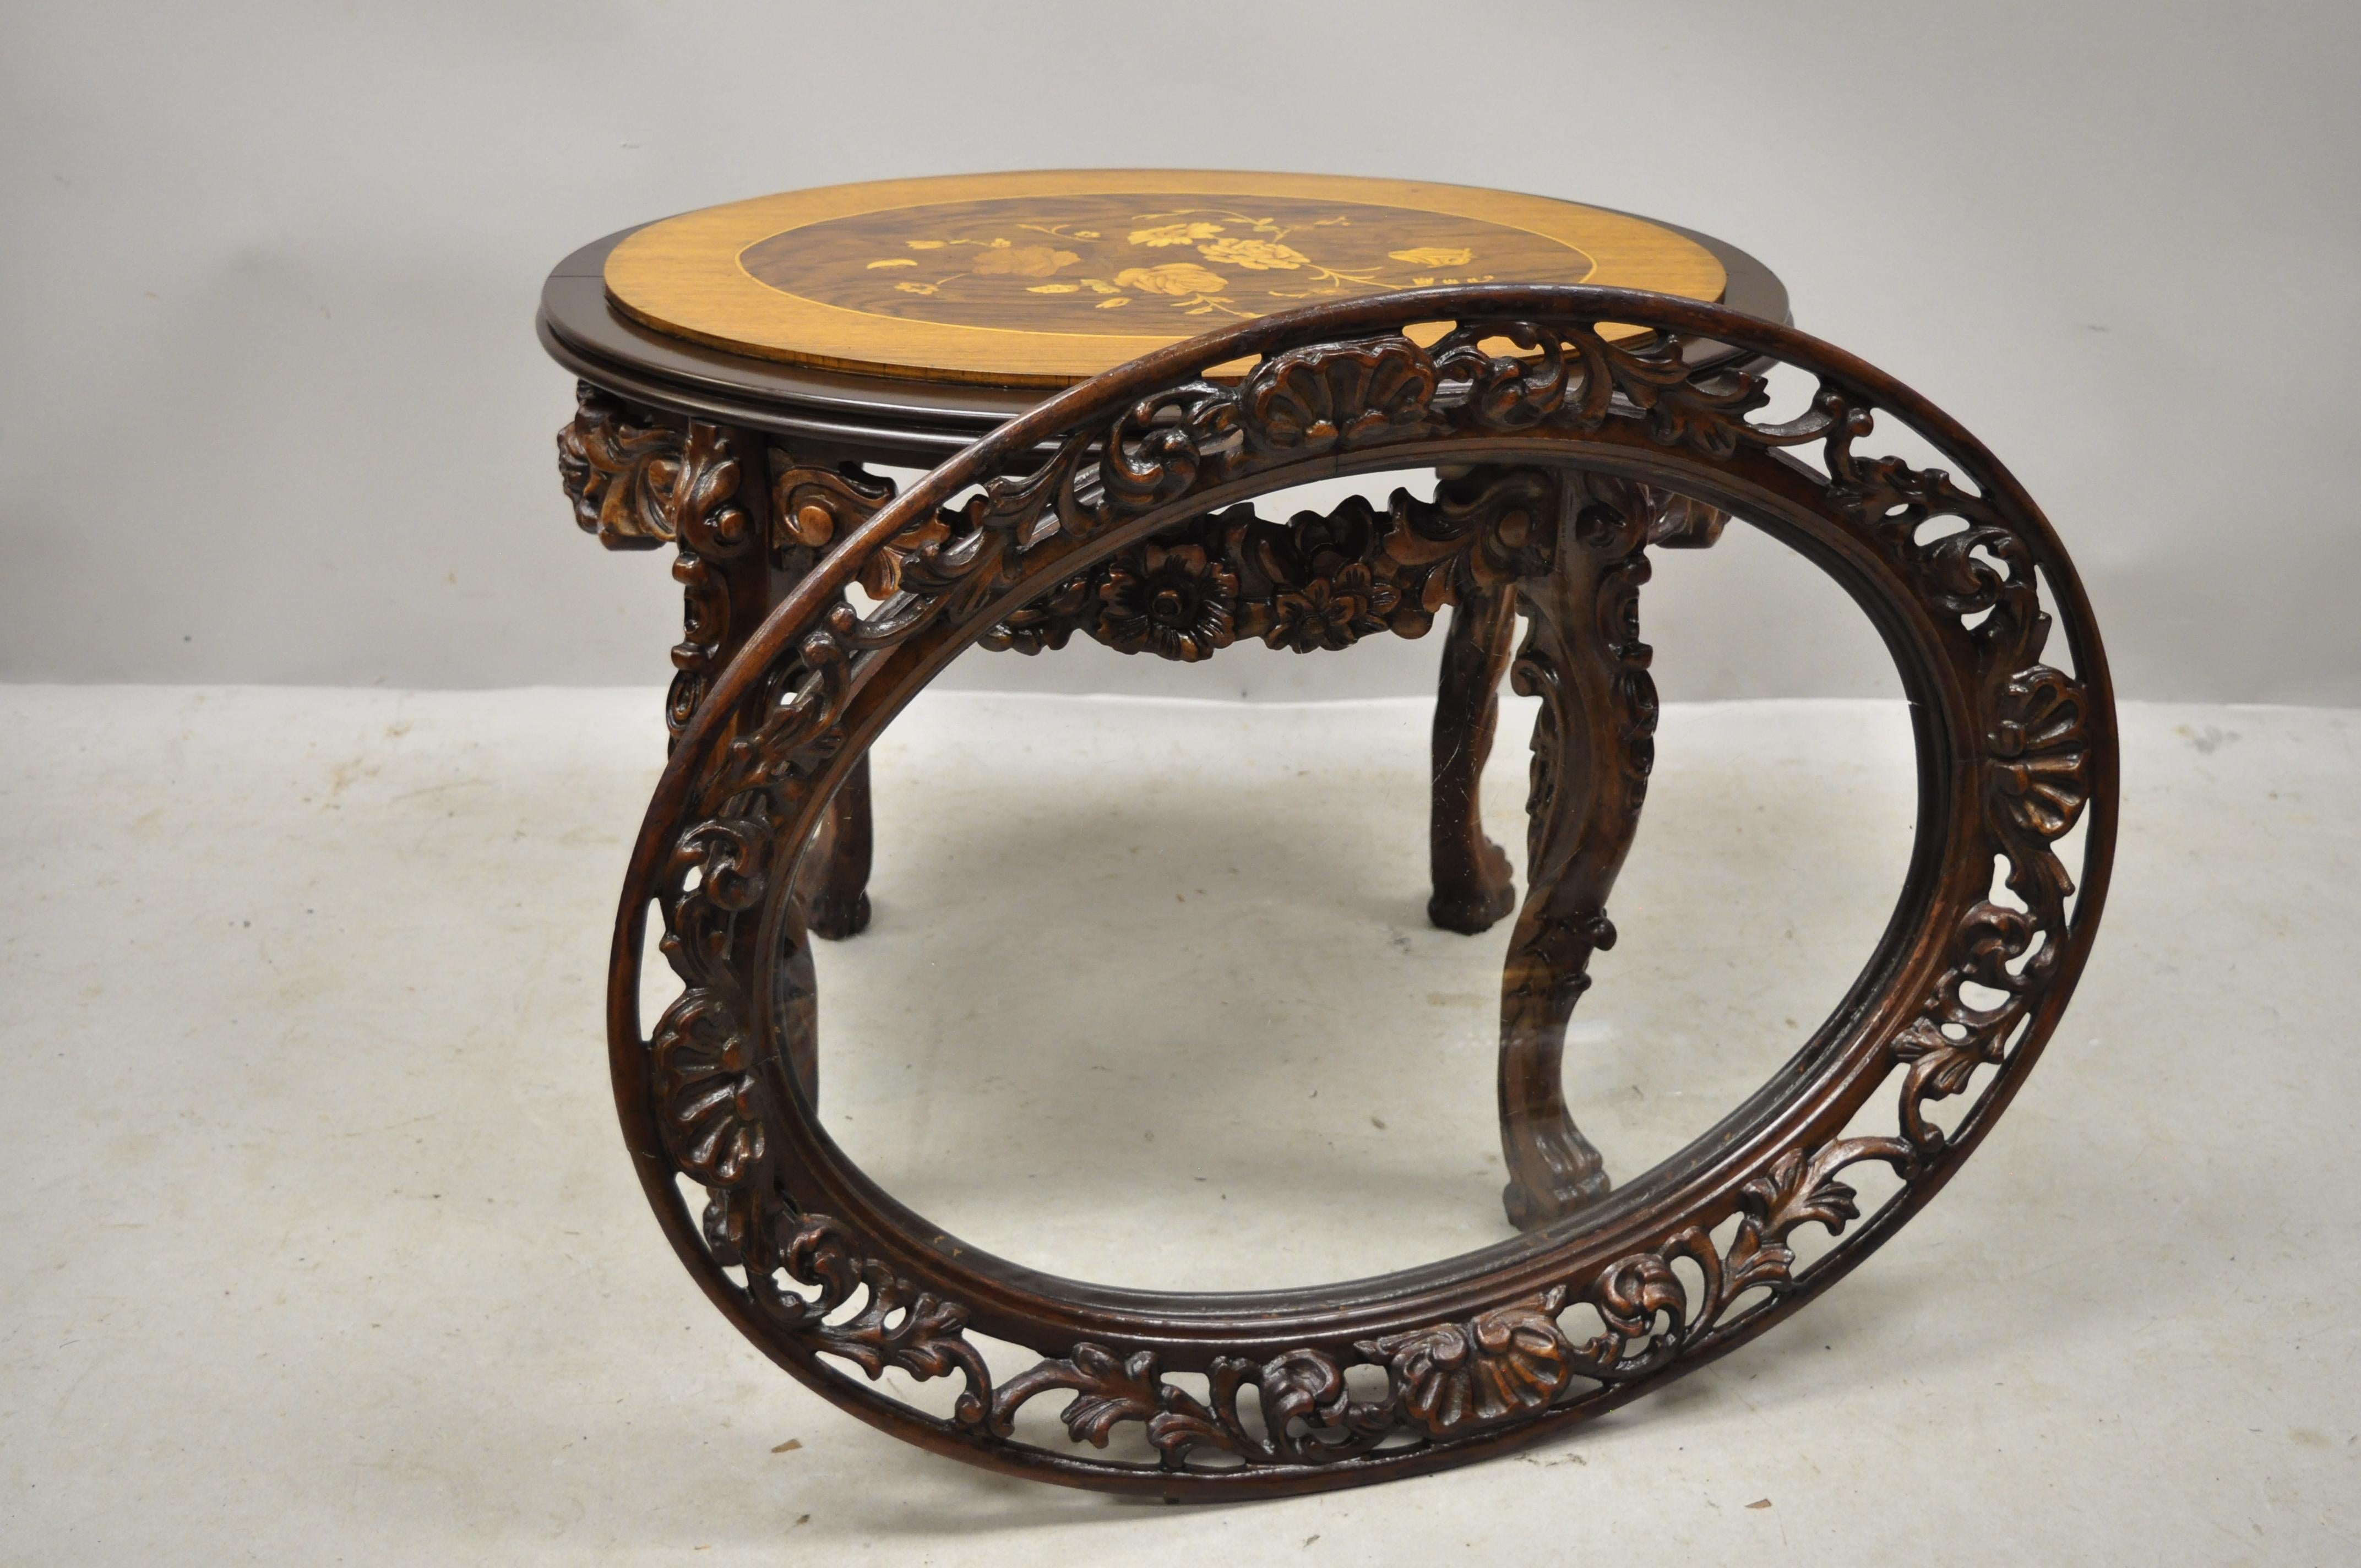 Antique French Louis XV satinwood inlay floral carved small tray top coffee table. Item features a floral carved drape skirt, paw feet, removable glass top, satinwood floral inlay, solid wood construction, nicely carved details, quality